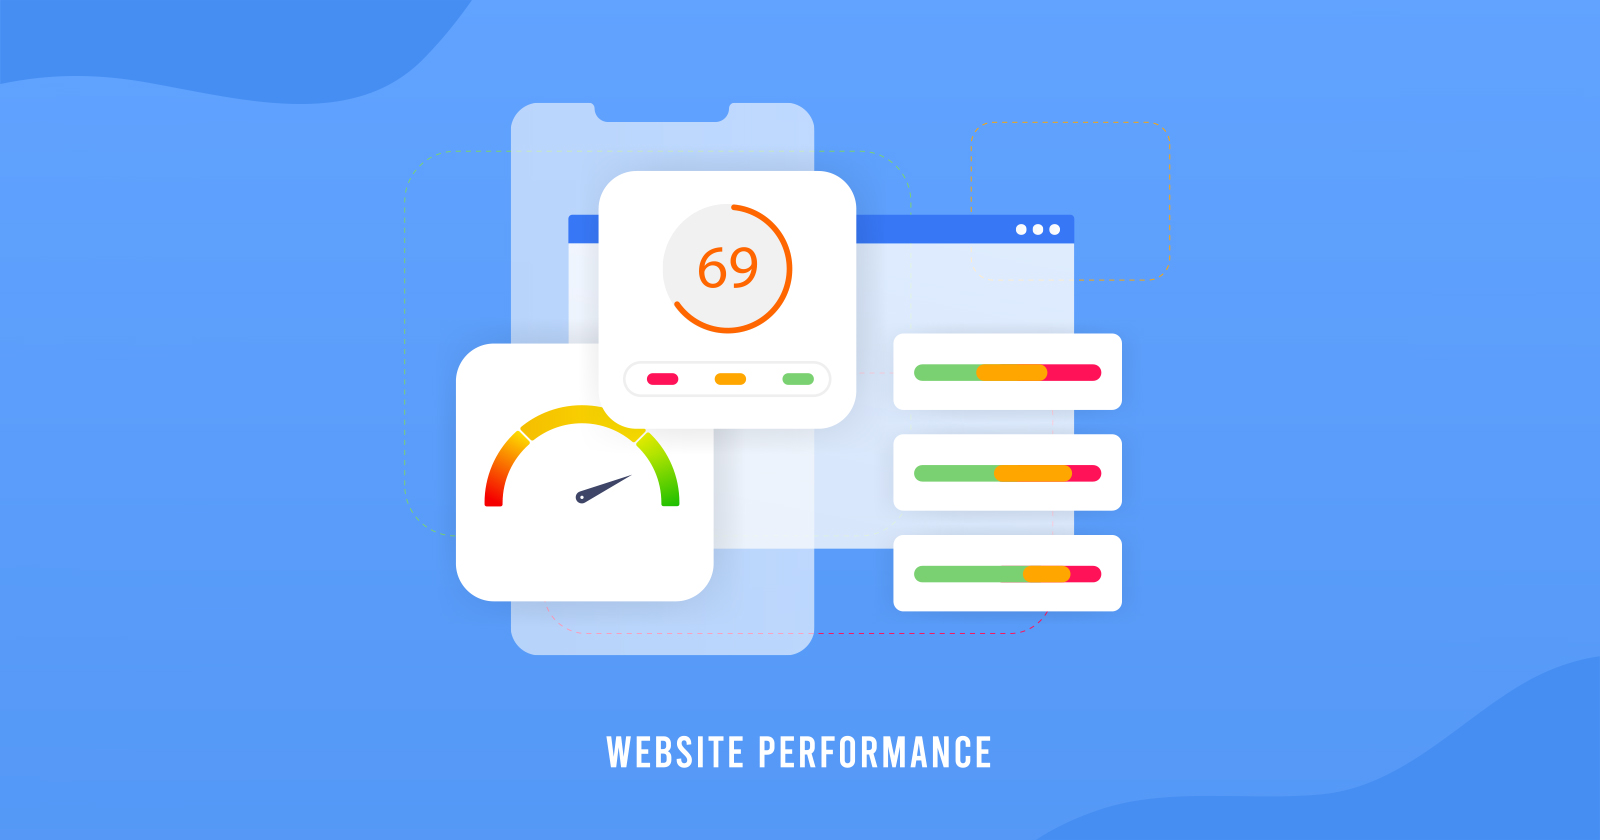 How To Improve Page Speed To Pass Google's Core Web Vitals Assessment